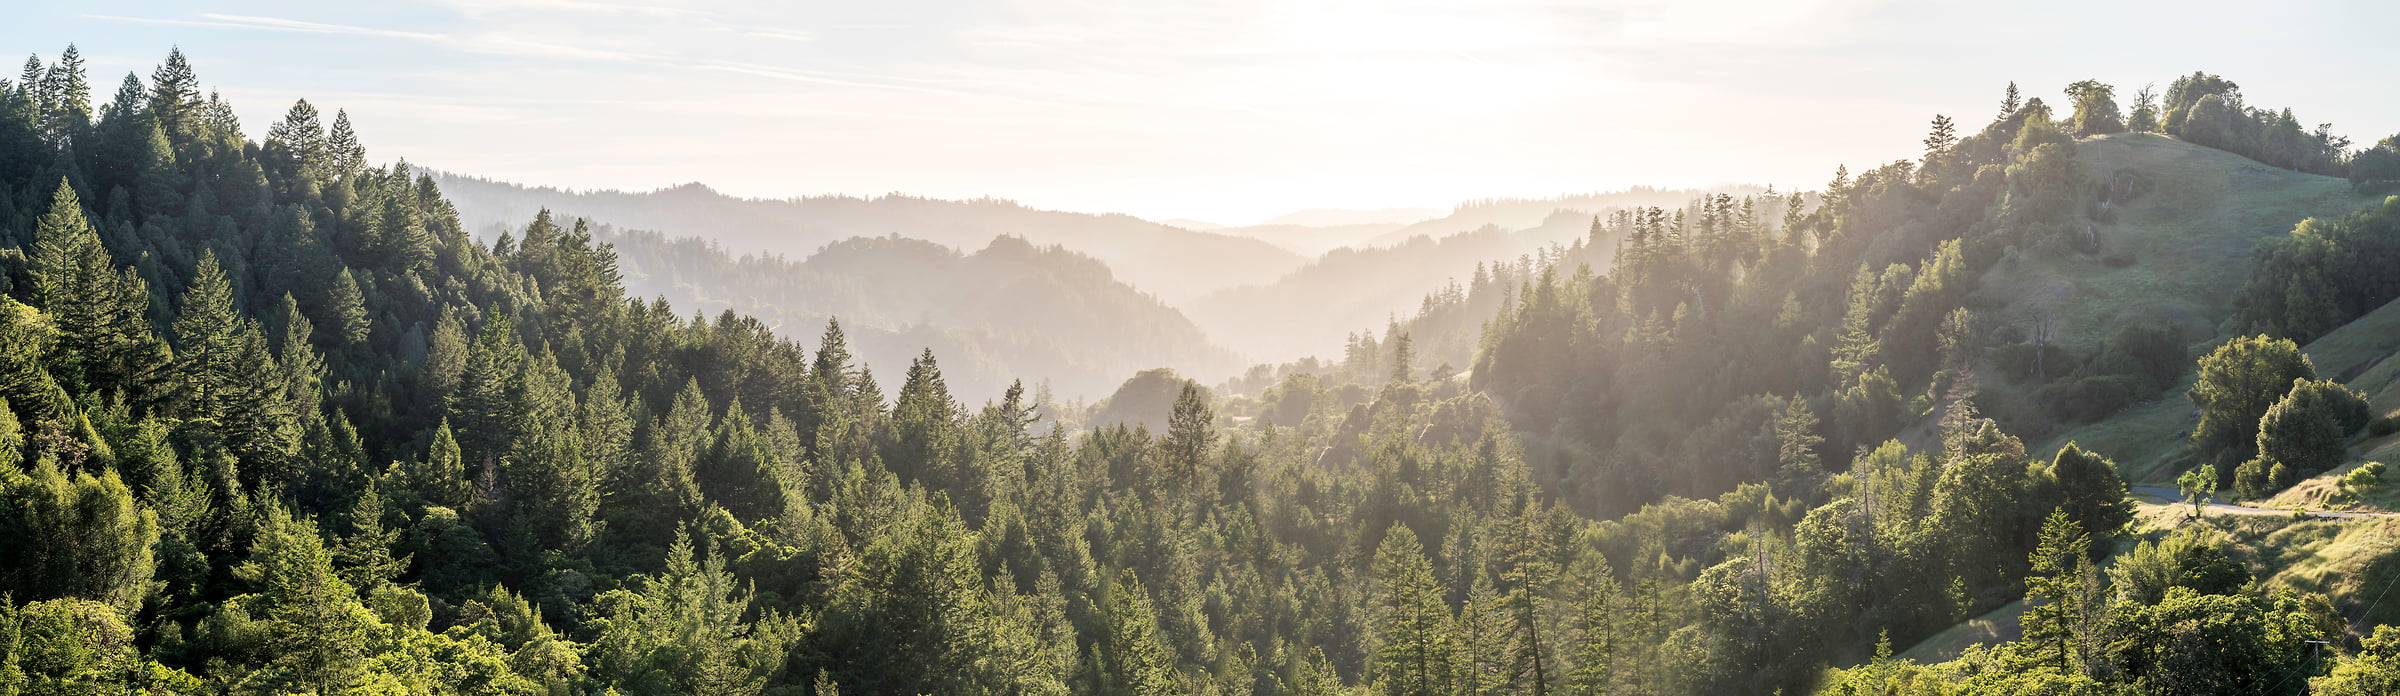 223 megapixels! A very high resolution, large-format VAST photo of the hills in California with forests; fine art landscape photo created by Justin Katz in Northern California